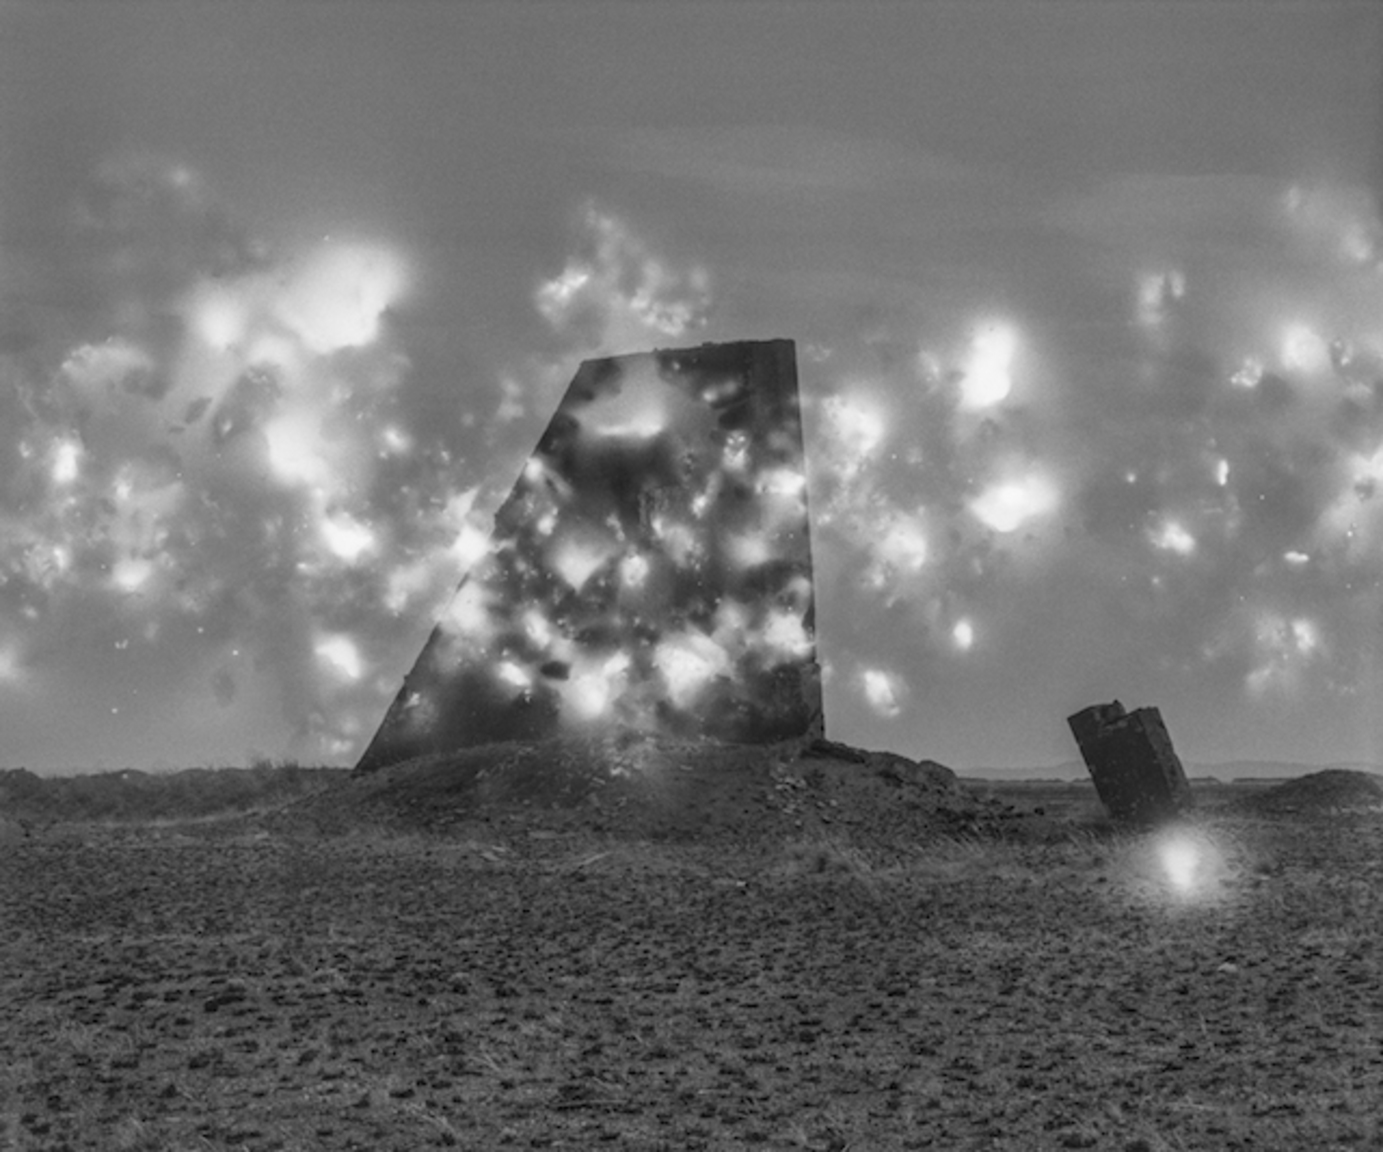 JULIAN CHARRIÈRE, POLYGON XXVII, 2015. MEDIUM FORMAT BLACK AND WHITE PHOTOGRAPH, DOUBLE EXPOSURE THROUGH THERMONUCLEAR STRATA, ON PHOTO RAG BARYTA, SEMIPALATINSK NUCLEAR WEAPONS TEST SITE IN KAZAKHSTAN.
© Julian Charriere / BONO 2023